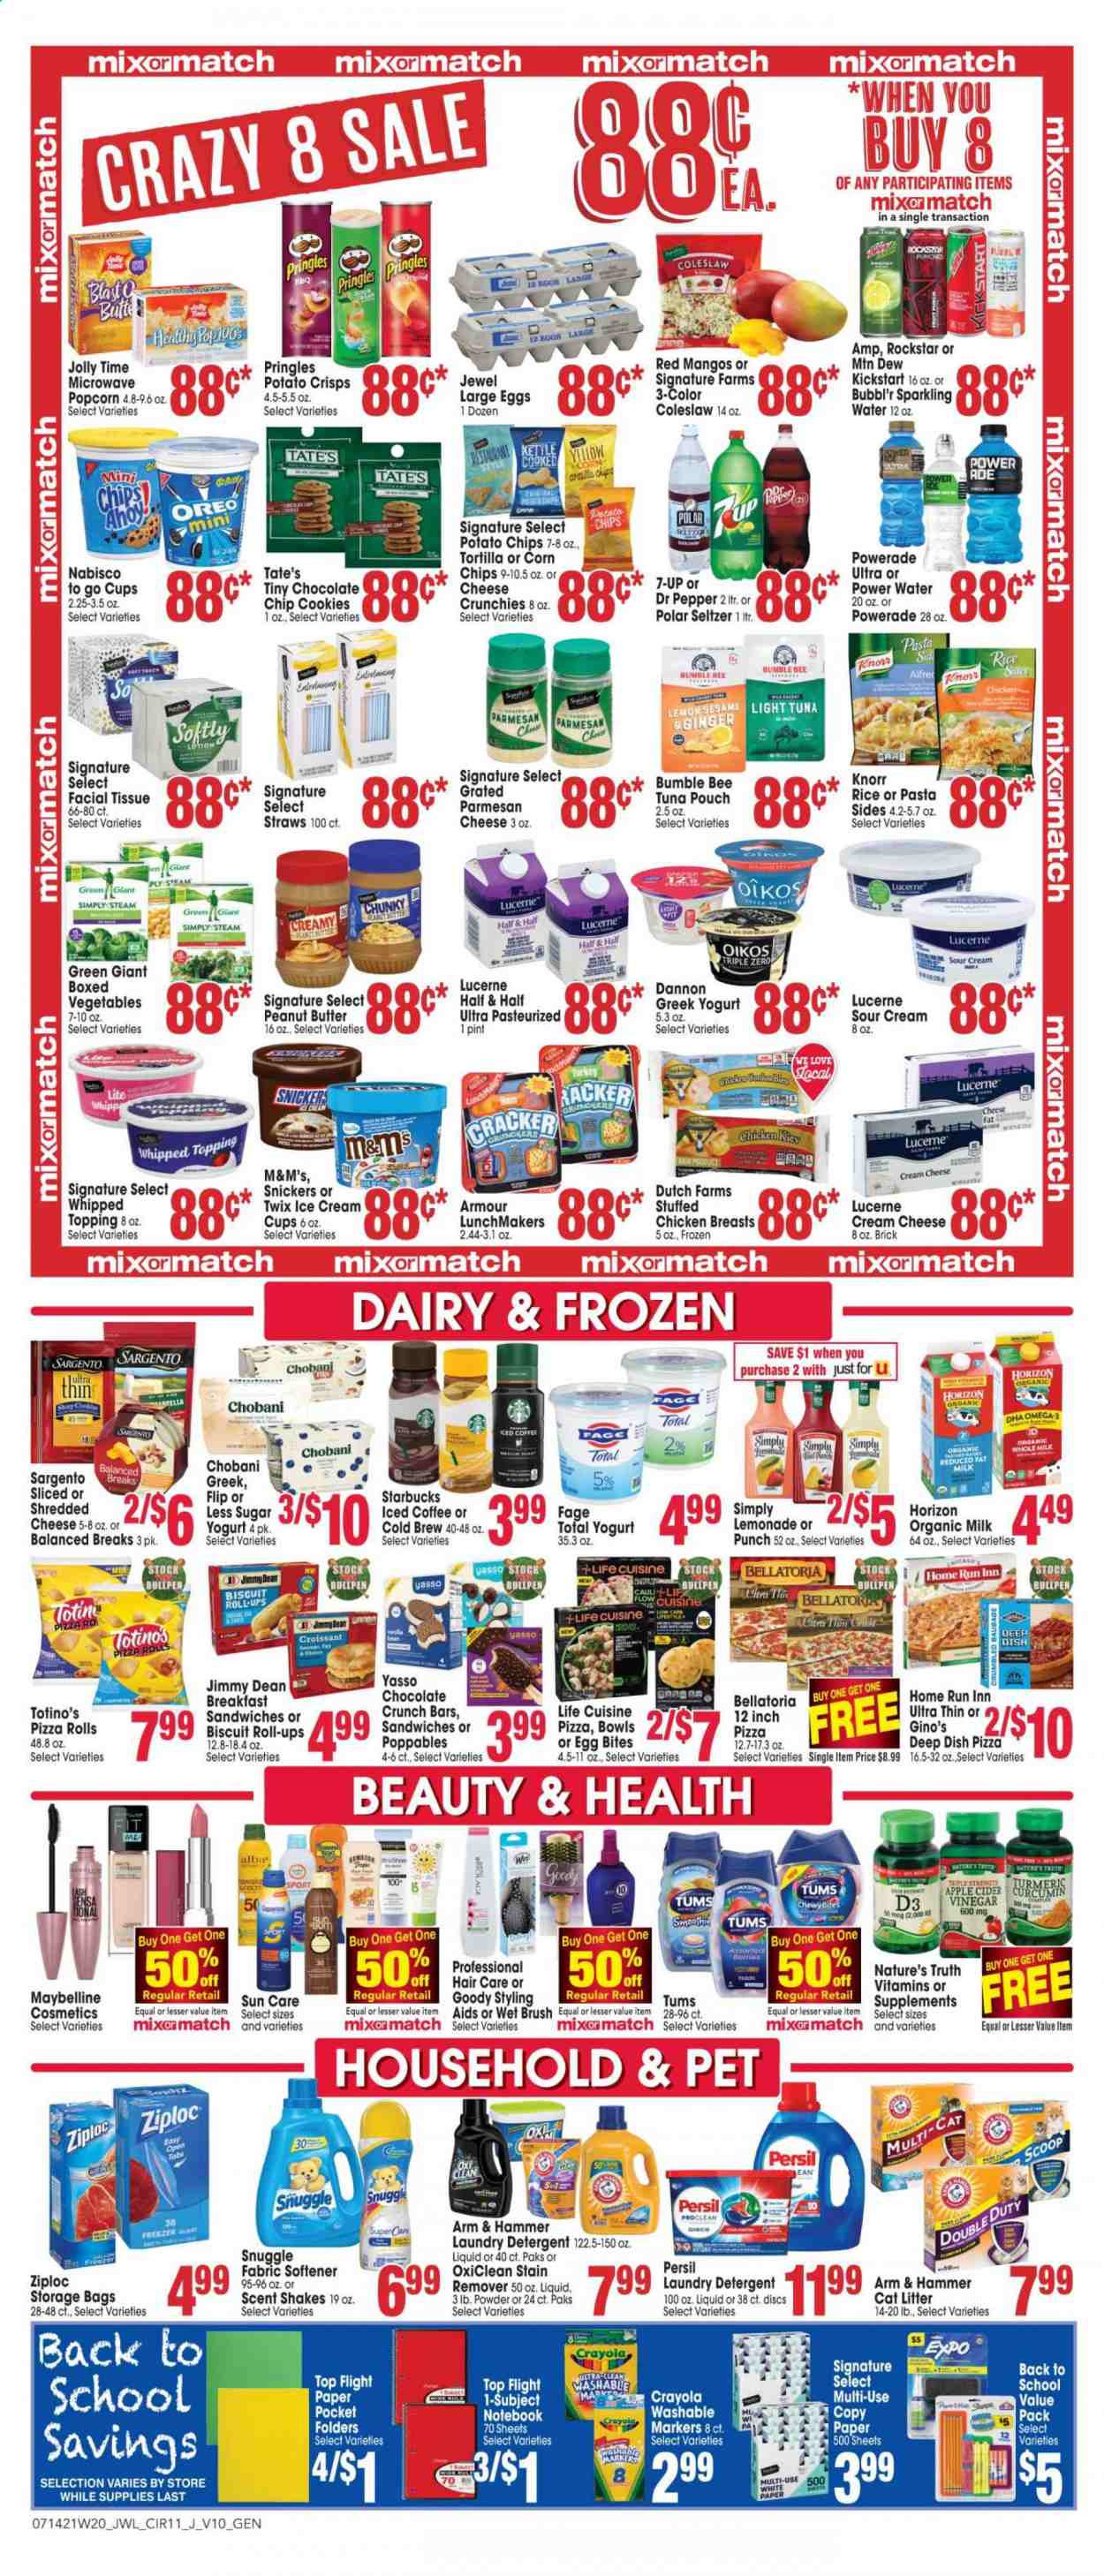 thumbnail - Jewel Osco Flyer - 07/14/2021 - 07/20/2021 - Sales products - tortillas, pizza rolls, mango, tuna, coleslaw, pizza, sandwich, Bumble Bee, Knorr, Jimmy Dean, stuffed chicken, ham, shredded cheese, parmesan, Sargento, greek yoghurt, Oreo, yoghurt, Oikos, Chobani, Dannon, organic milk, shake, large eggs, sour cream, ice cream, Bellatoria, cookies, Snickers, Twix, M&M's, crackers, biscuit, potato crisps, potato chips, Pringles, corn chips, popcorn, ARM & HAMMER, topping, light tuna, peanut butter, lemonade, Mountain Dew, Powerade, Dr. Pepper, 7UP, Rockstar, smoothie, seltzer water, sparkling water, iced coffee, Starbucks, apple cider, cider, tissues, detergent, stain remover, OxiClean, Snuggle, Persil, fabric softener, laundry detergent, body lotion, Ziploc, Maybelline, storage bag, gallon, brush, cup, straw, crayons, Sharp, folder, paper, cat litter, Nature's Truth, vitamin D3, Half and half. Page 11.